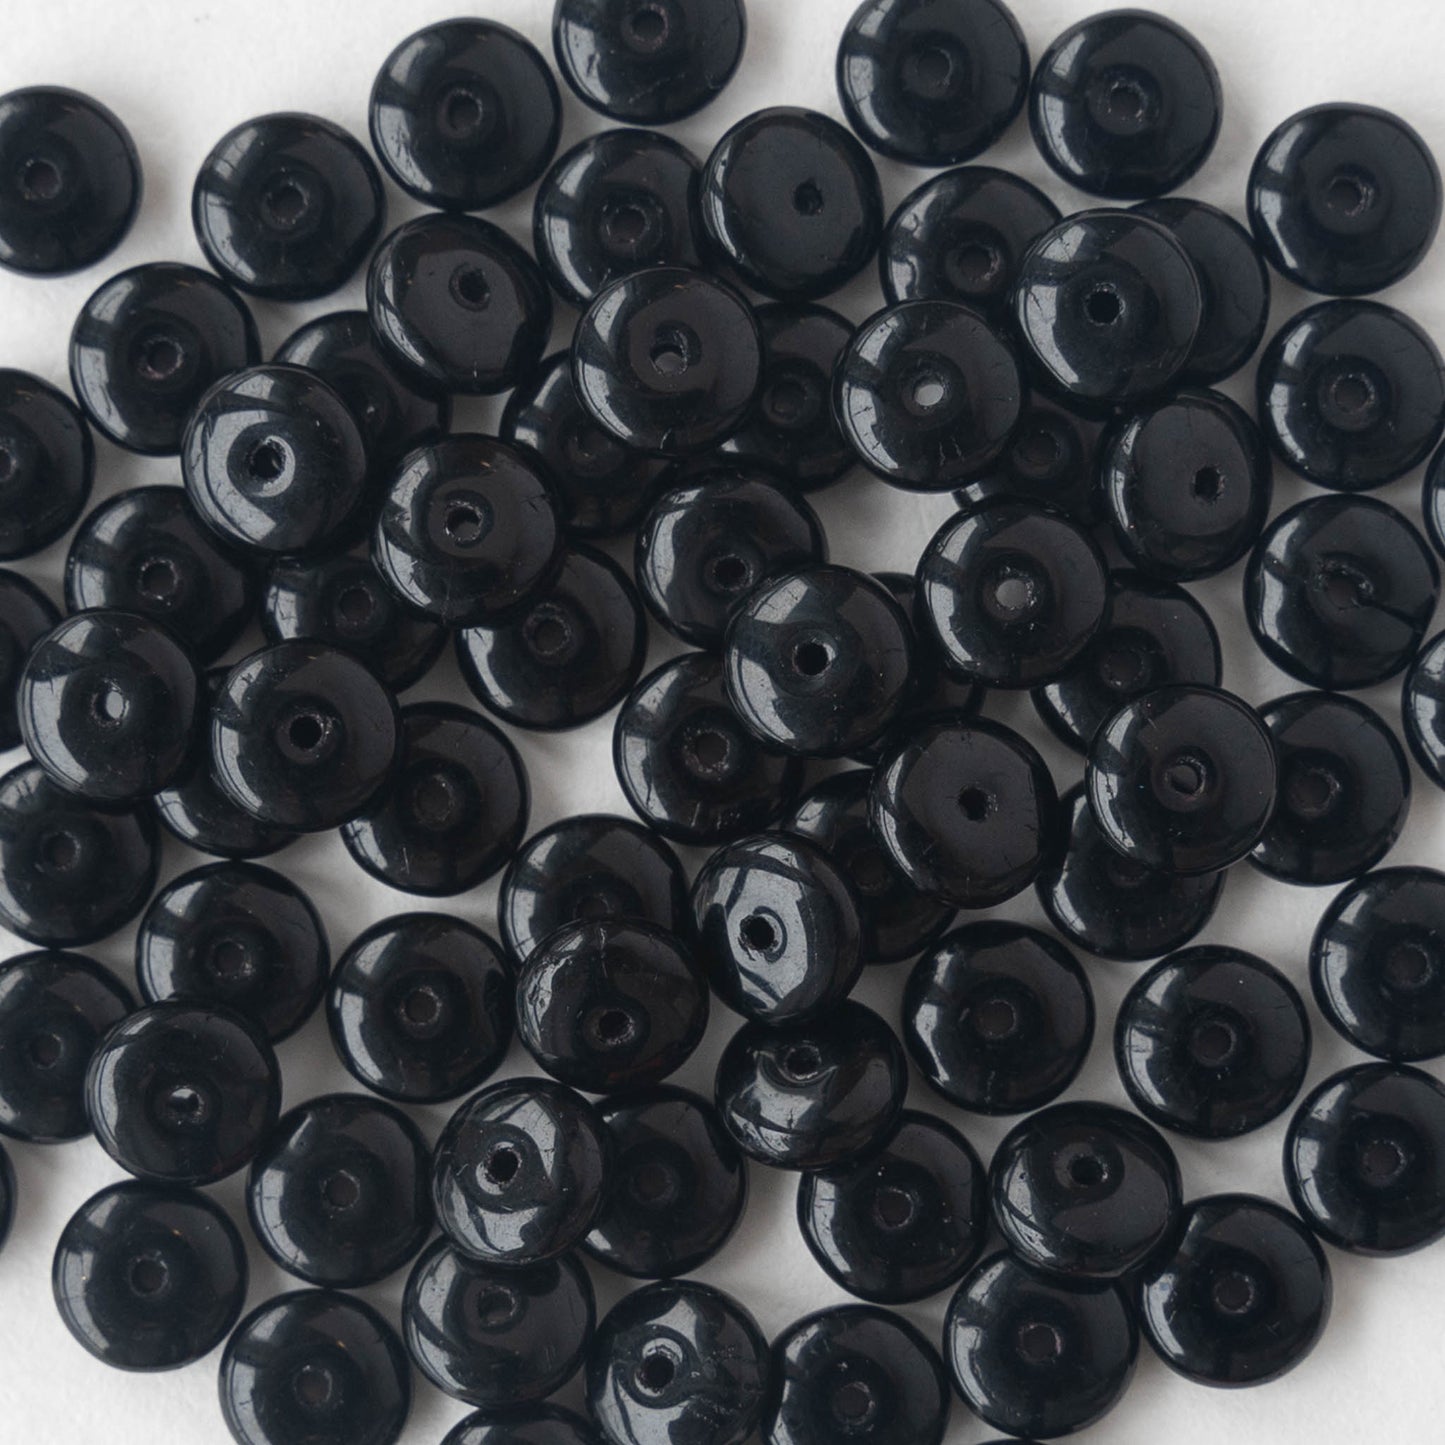 6mm Glass Rondelle Beads - Opaque Black - 120 Beads